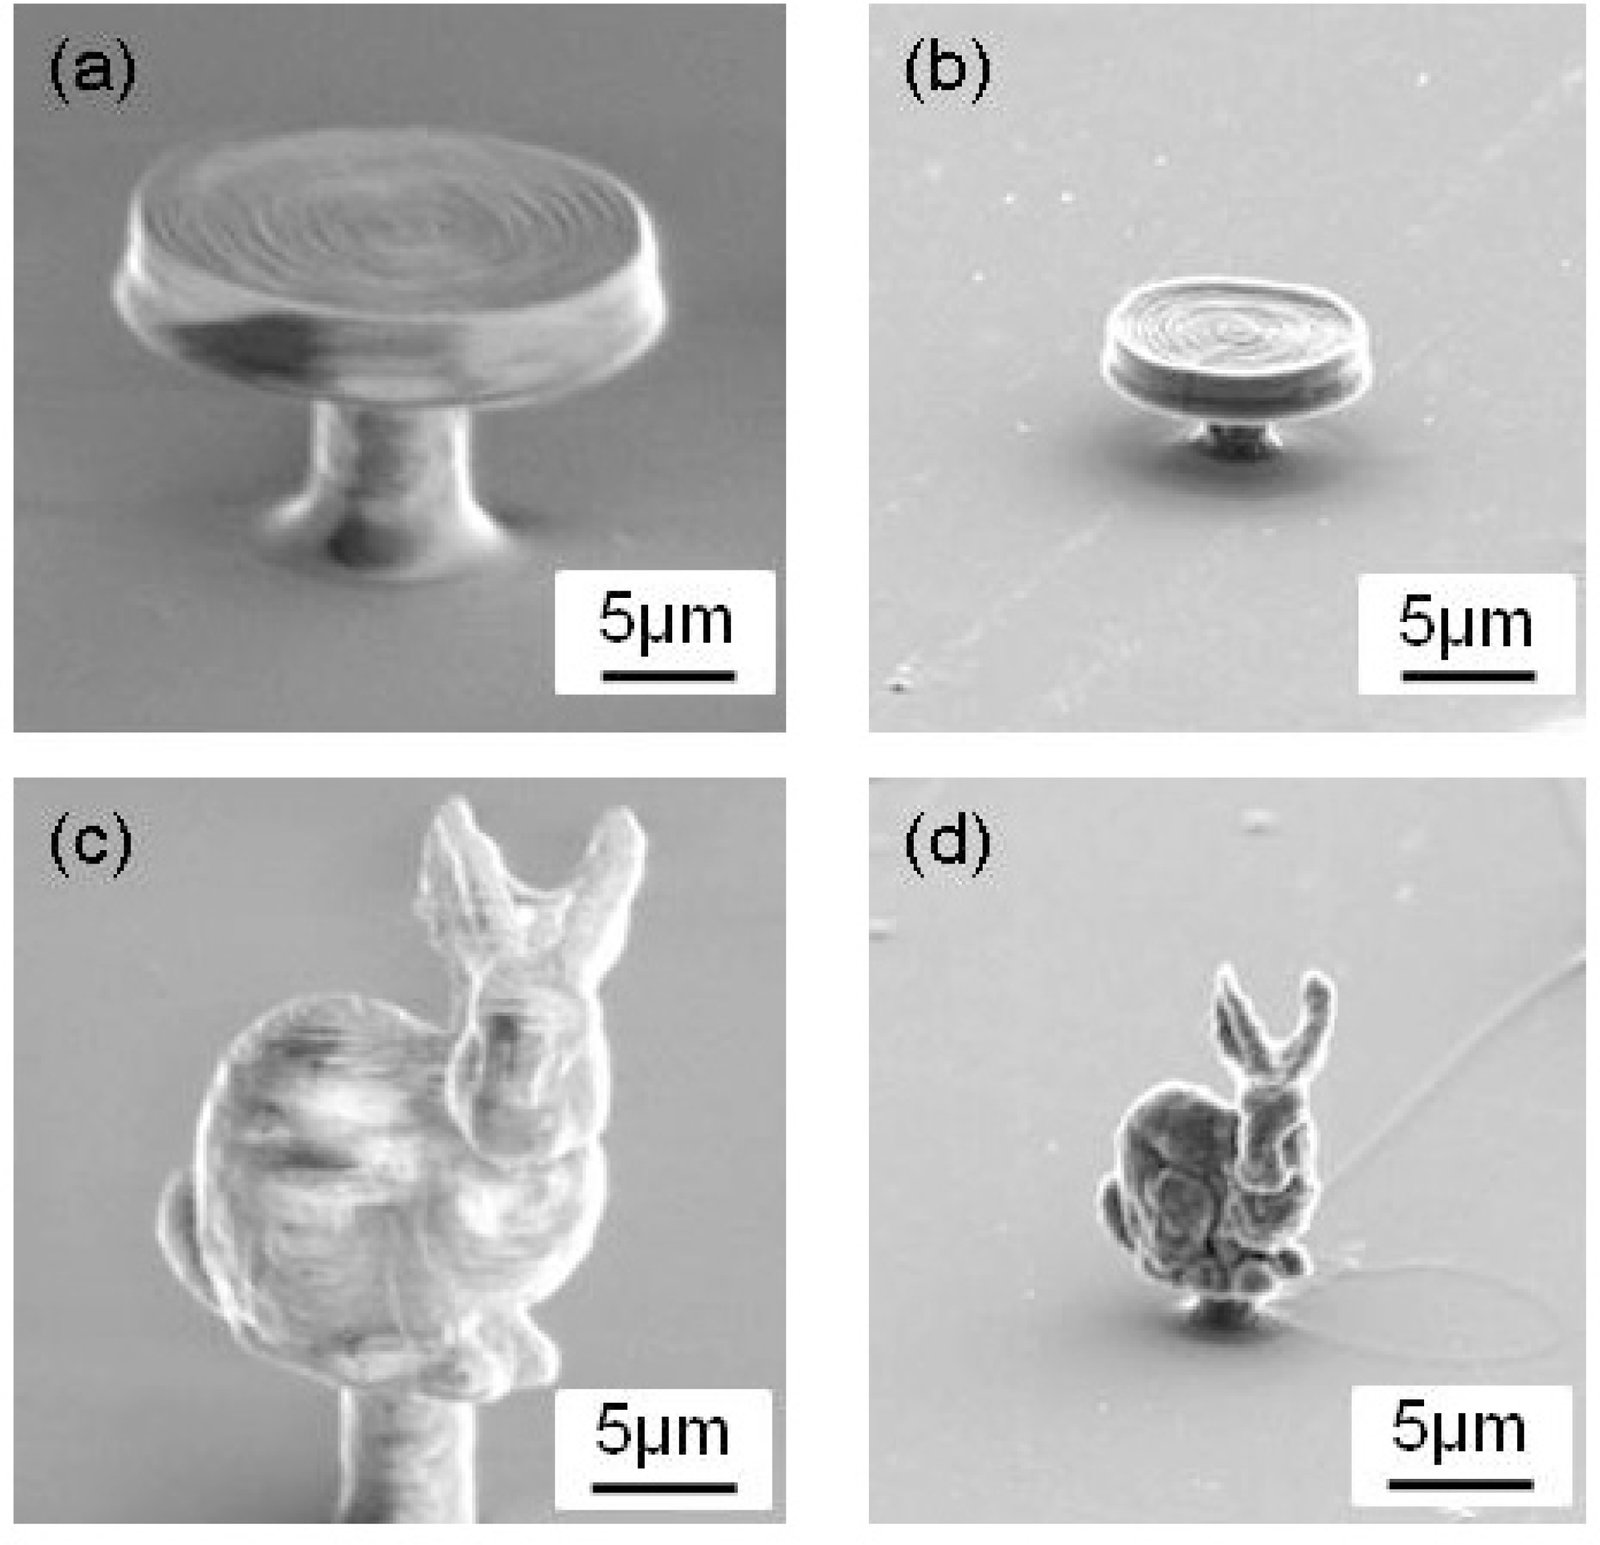 Two microstructures that have been made with the new resin material, developed by researchers at Yokohama National University, Tokyo Institute of Technology and C-MET